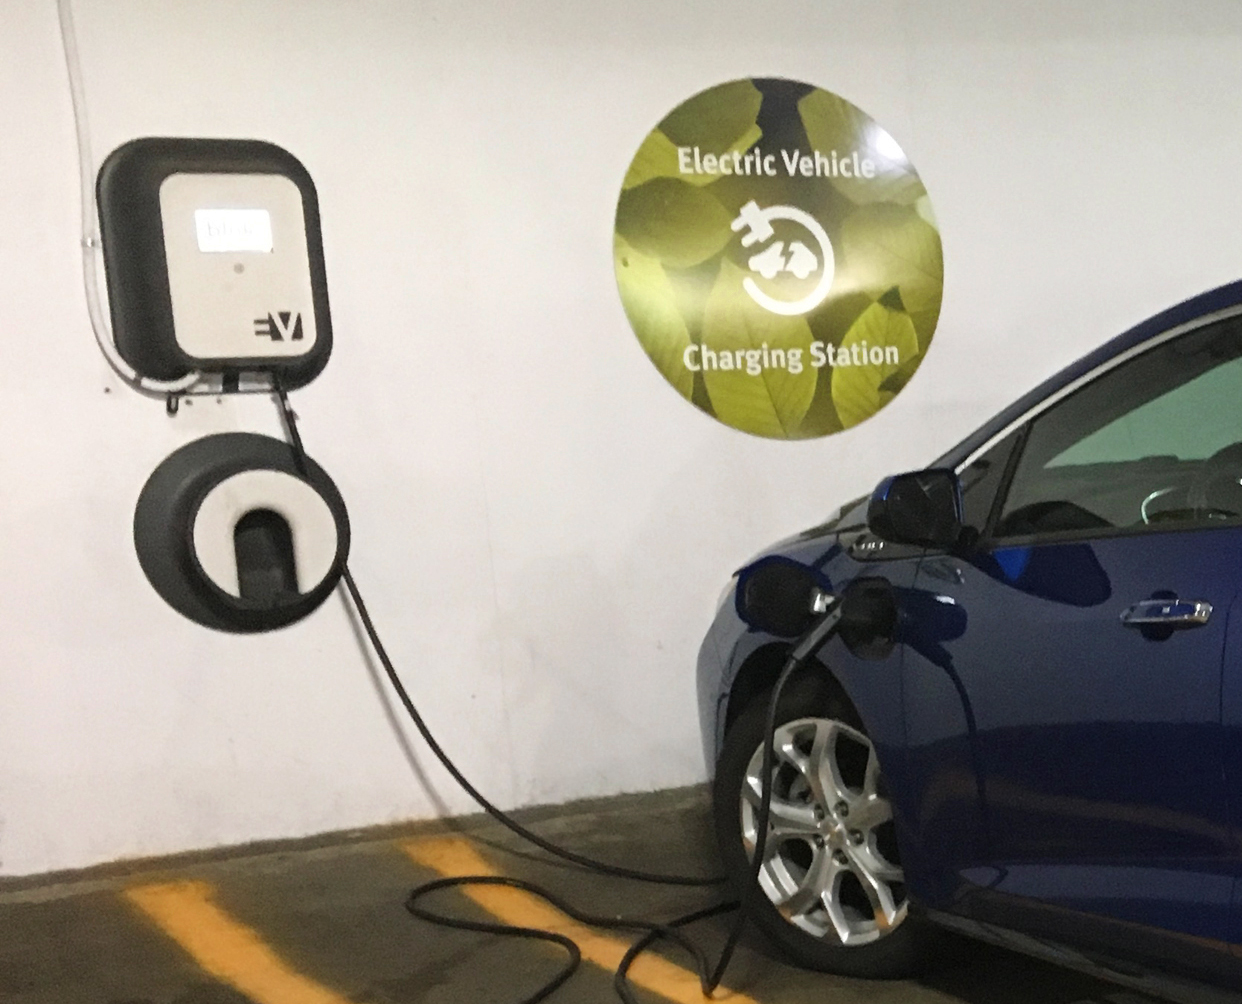 A dark blue electric car is plugged into a charger at an EV designated space in a parking structure. &lt;a href=&quot;https://commons.wikimedia.org/wiki/File:Chevy_Volt_2nd_gen_charging_Arlington_08_2017_5216.jpg&quot;&gt;Mariordo (Mario Roberto Durán Ortiz)&lt;/a&gt;, &lt;a href=&quot;https://creativecommons.org/licenses/by-sa/4.0&quot;&gt;CC BY-SA 4.0&lt;/a&gt;, via Wikimedia Commons